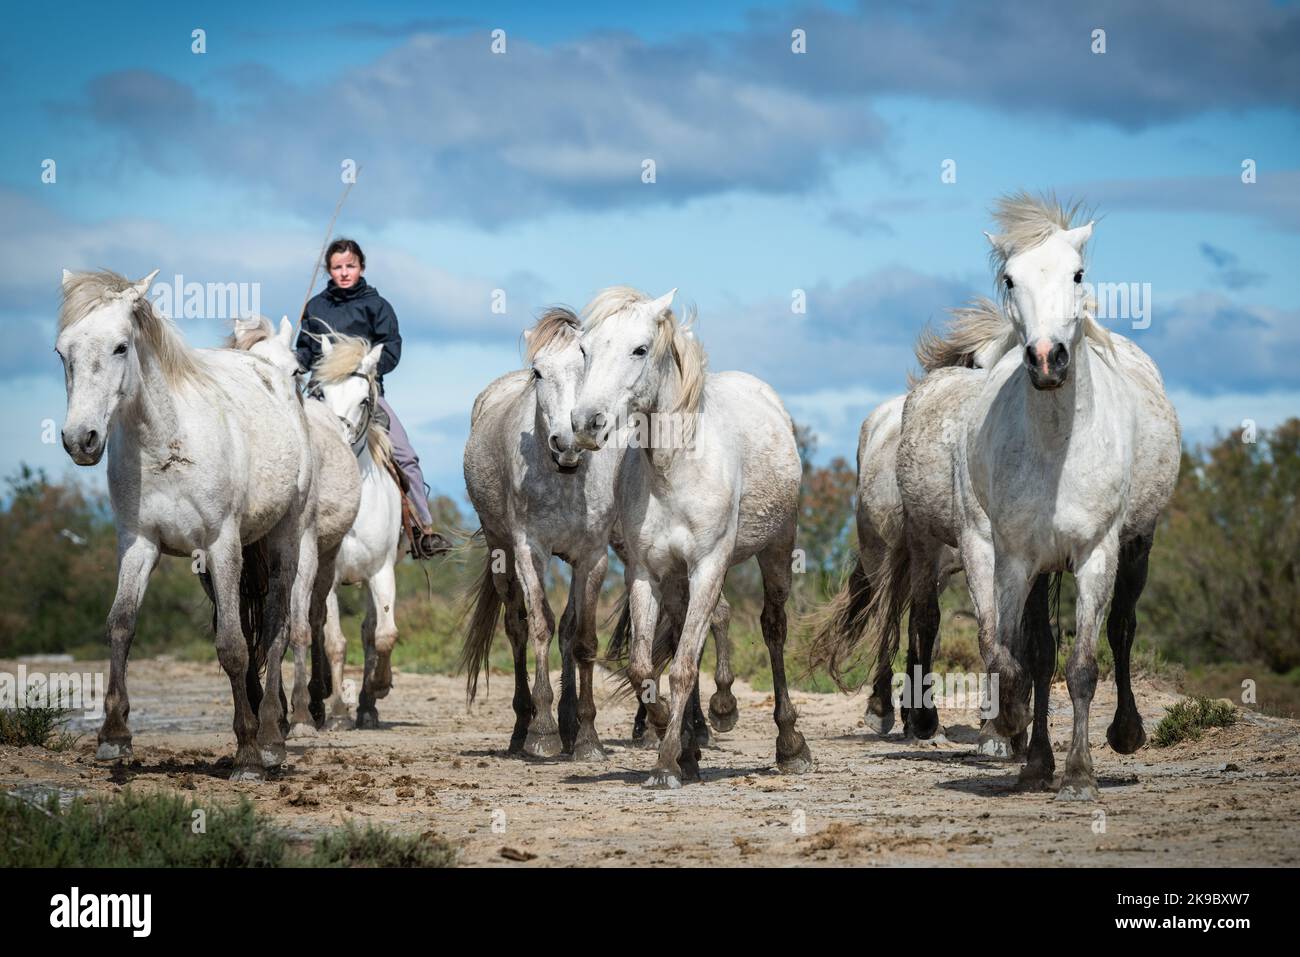 Camargue, France, April 27 2019 : White horses and two guardians are walking in the water all over in the swamp in Camargue, France. Stock Photo